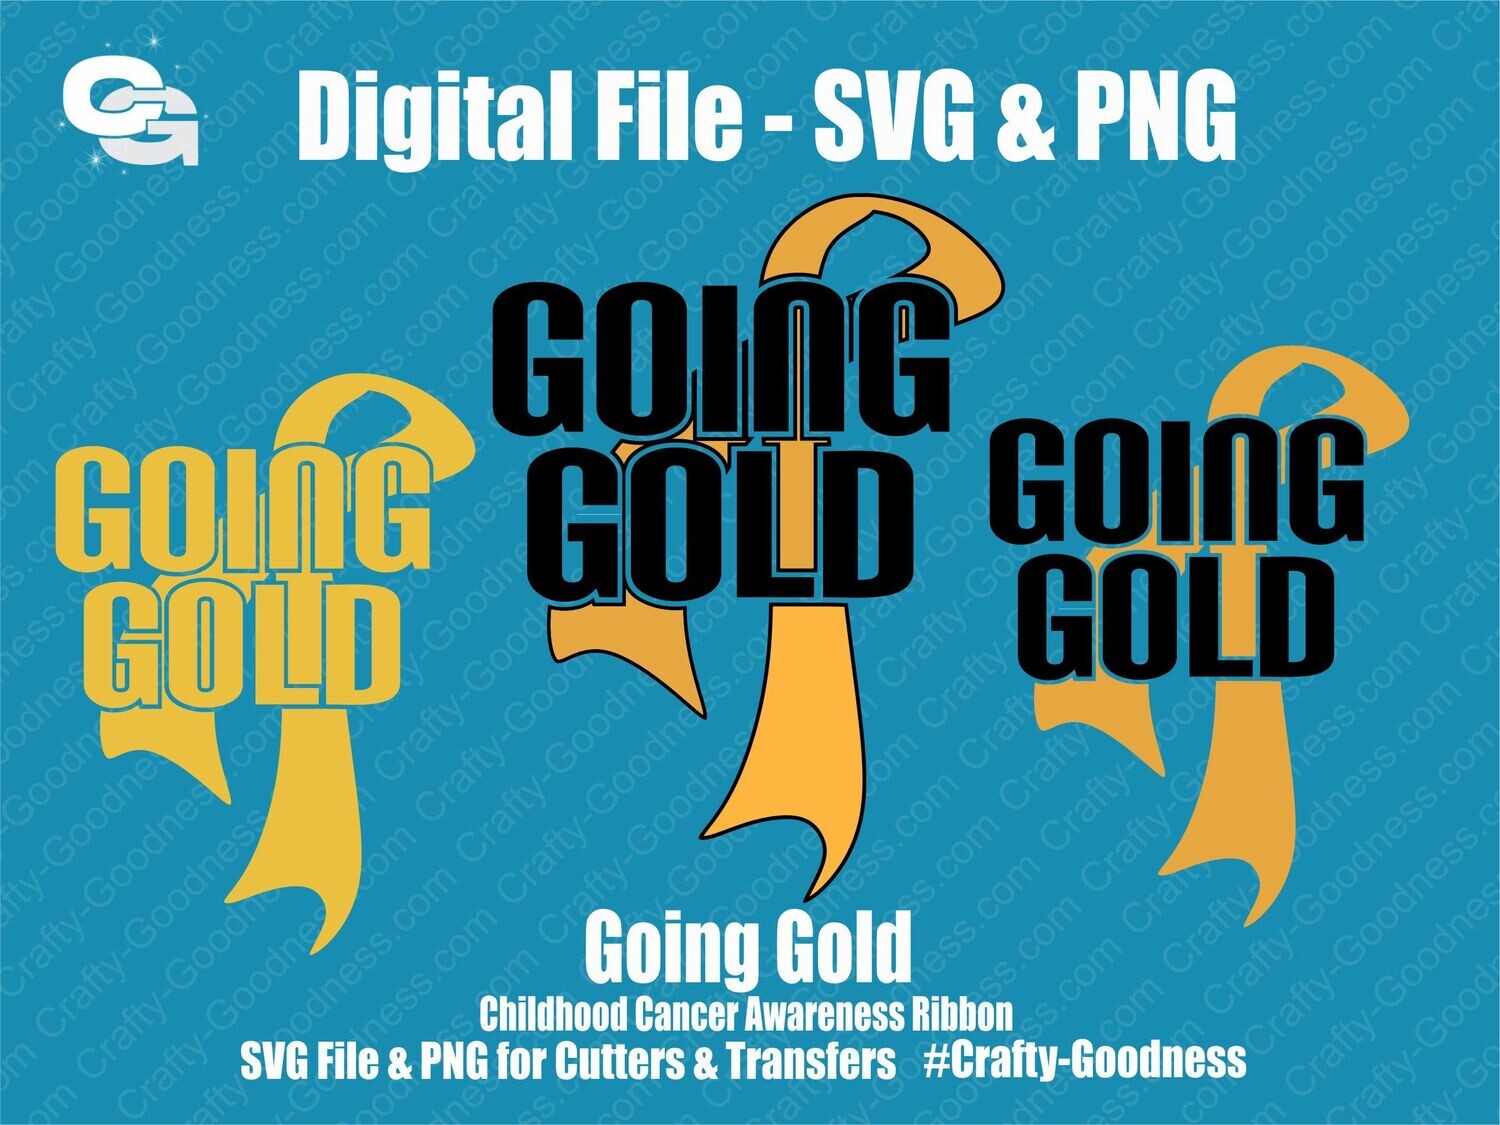 Going Gold for Childhood Cancer Awareness - SVG Vector Download DIY Cut Cutting File Cricut Silhouette and PNG